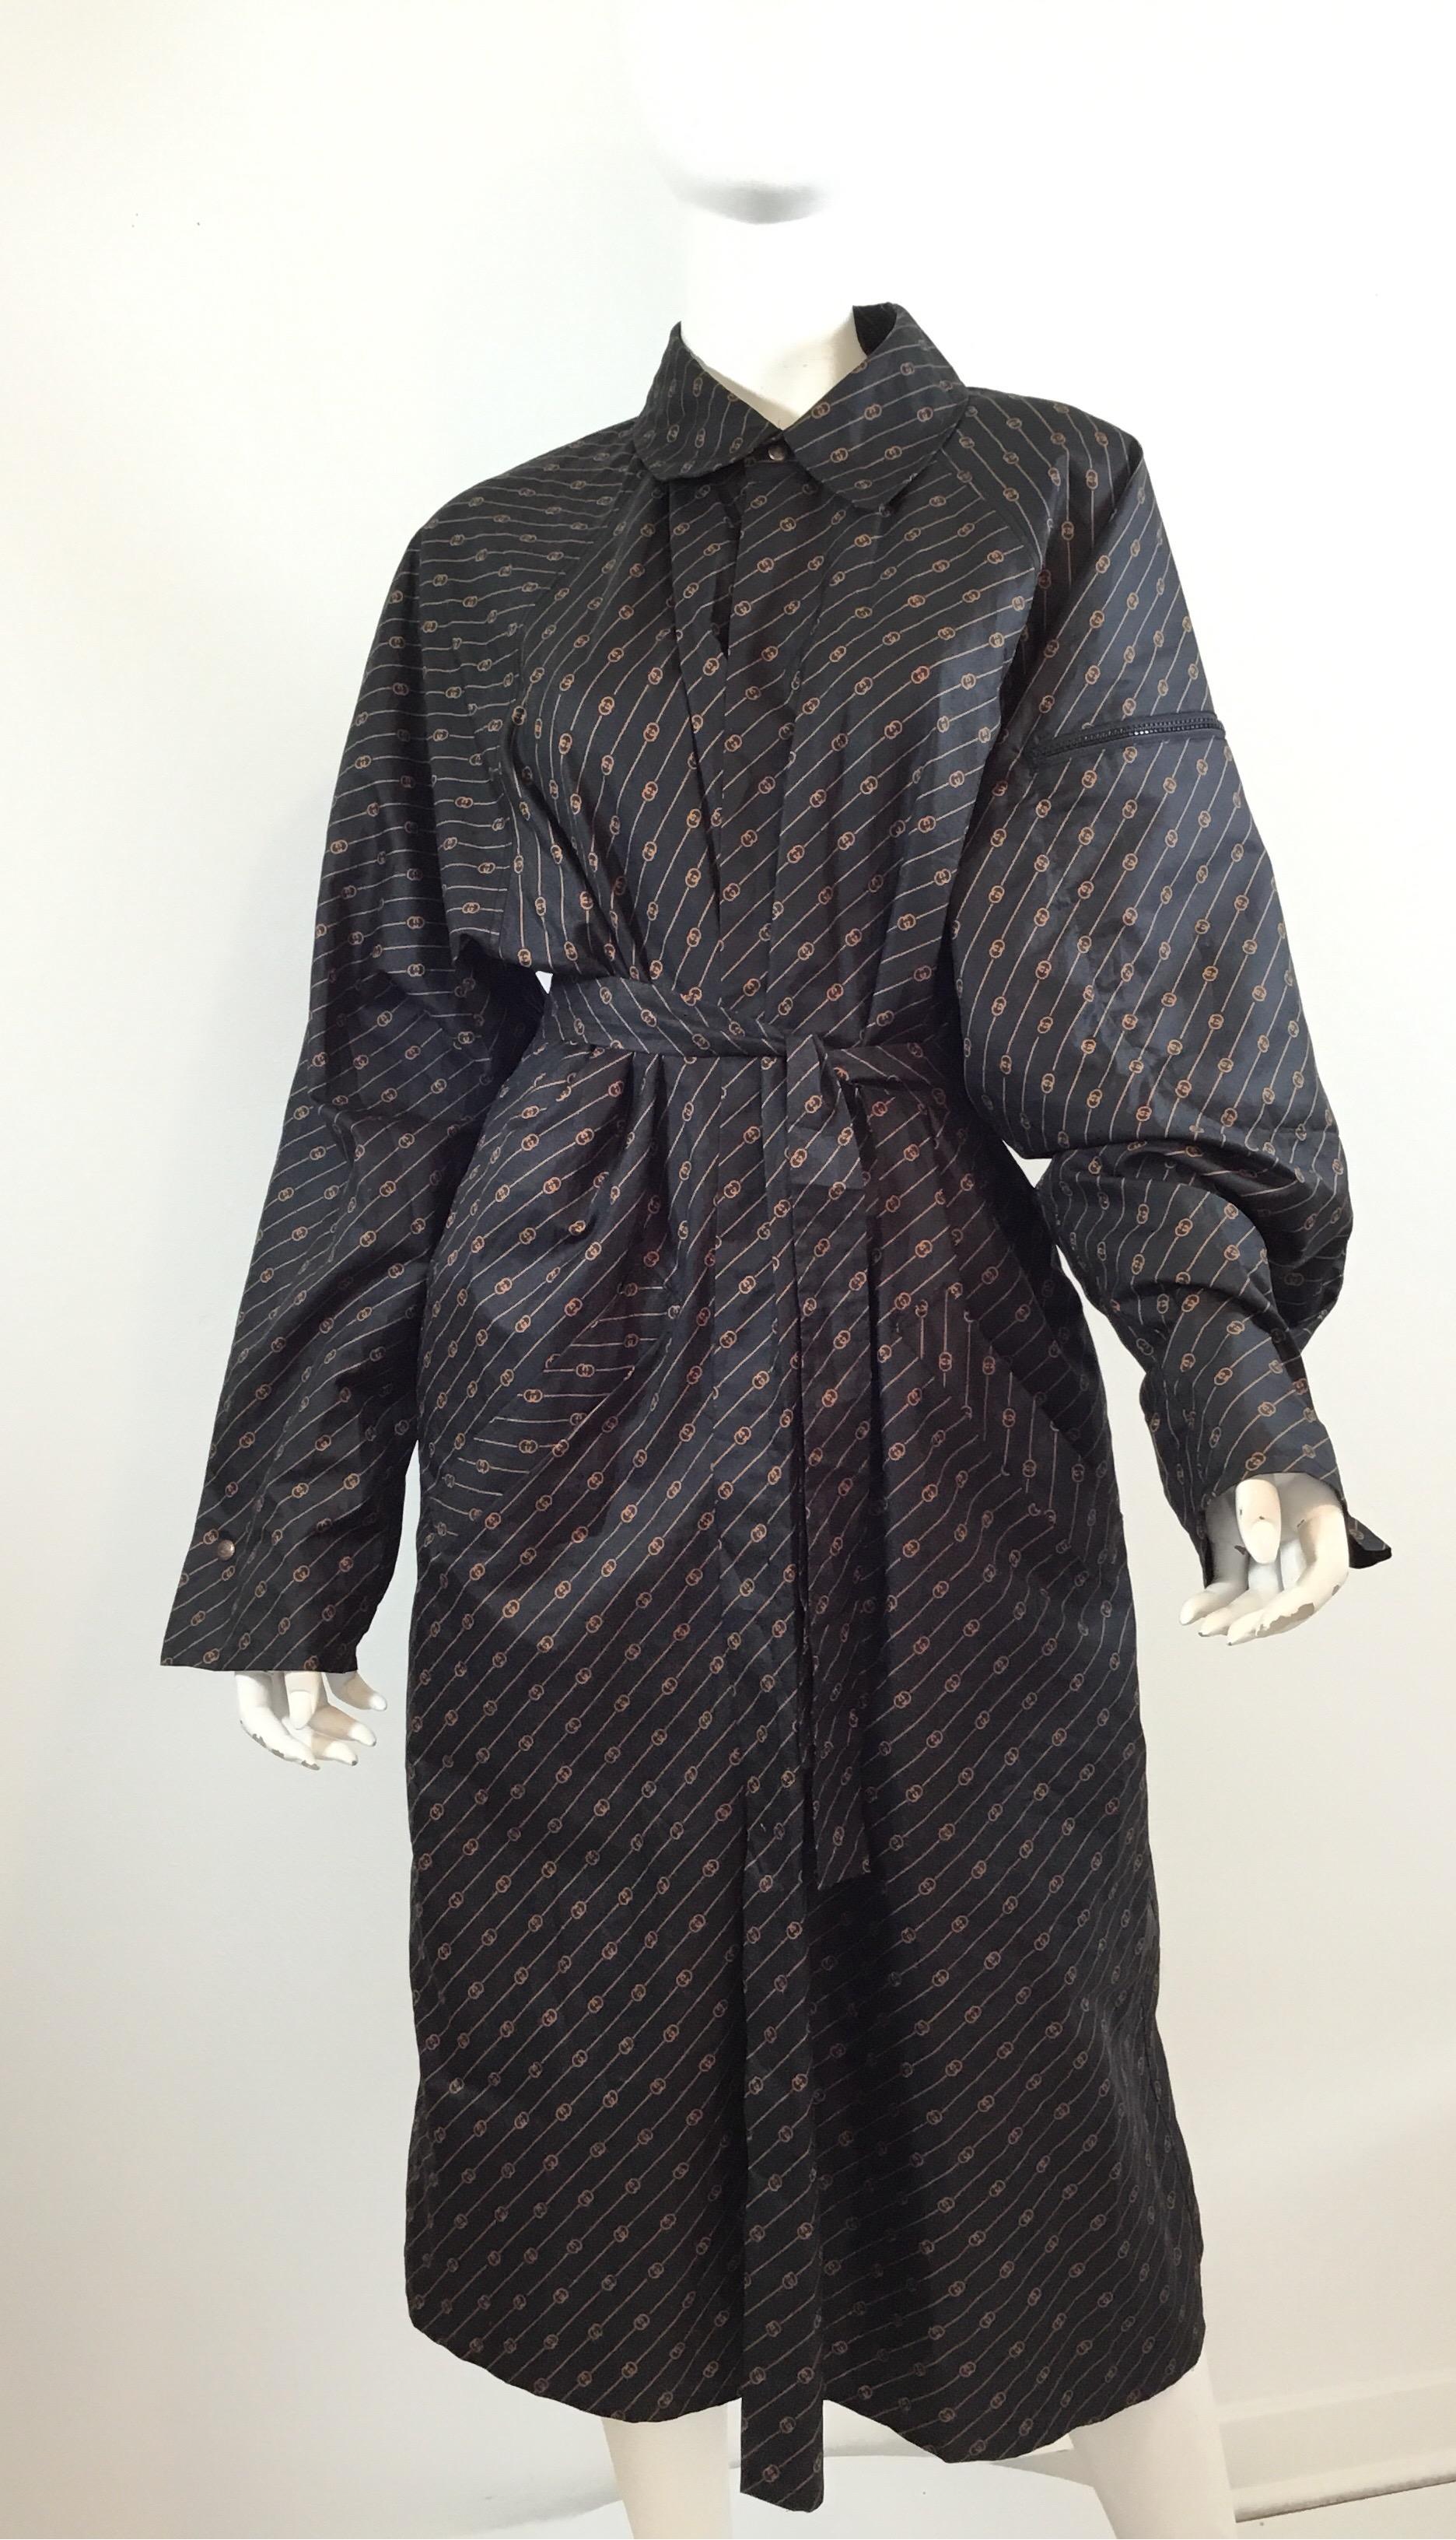 Vintage iconic Gucci raincoat with signature print throughout polyester material, made in Italy. Coat has a single snap button at the neck and a waist tie closure, pockets at the hips, pocket on the left sleeve in which also serves as the pocket to